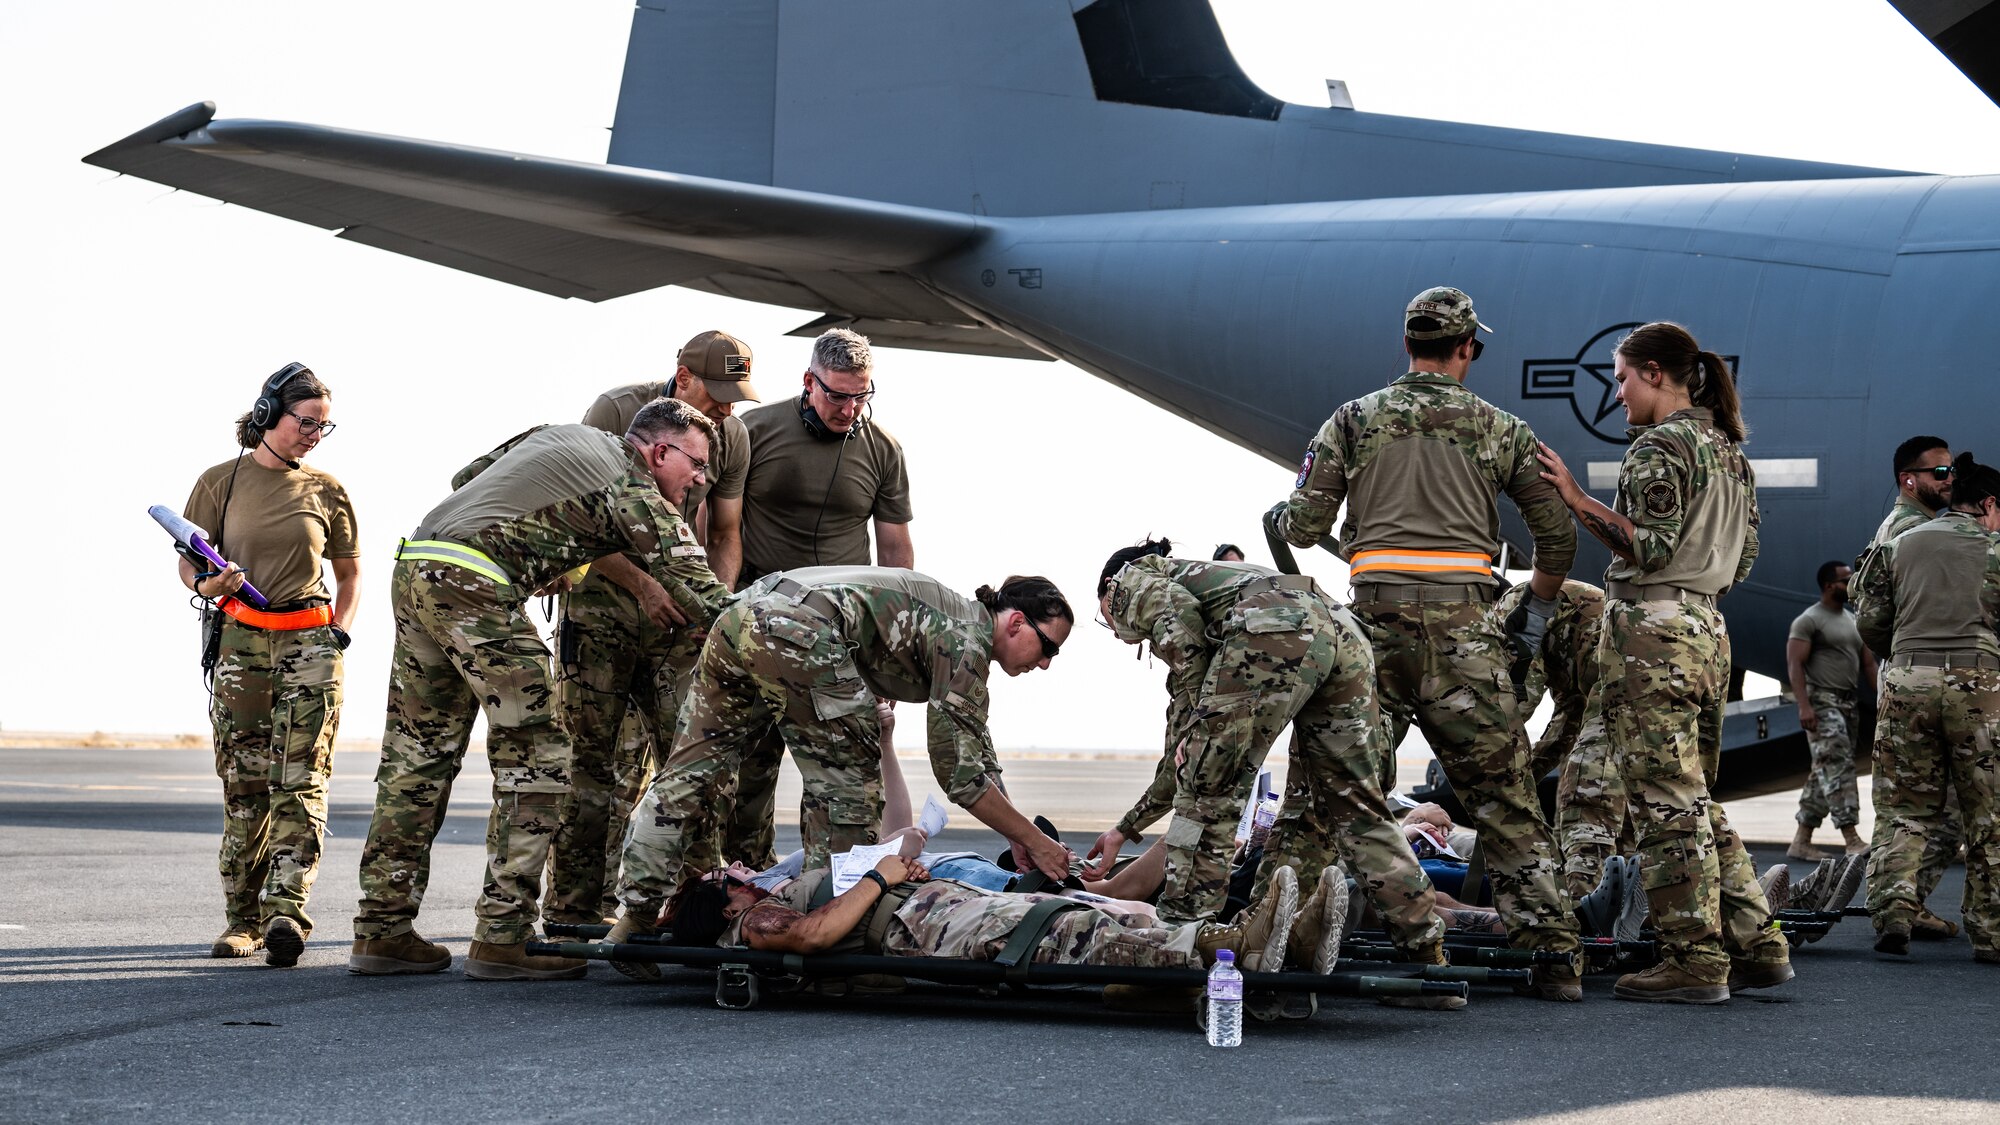 U.S. Air Force medical personnel from the 386th Expeditionary Medical Squadron field response team and the 405th Expeditionary Aeromedical Evacuation Squadron prepare to load victims from a simulated attack onto a C-130J Super Hercules during a contingency response development at Ali Al Salem Air Base, Kuwait, Aug. 9, 2023. This simulated mass-casualty training event provided joint participants from multiple wings and squadrons with the chance to put their life saving medical capabilities to the test, ensuring the safety of the U.S. and coalition forces here at ASAB. (U.S. Air Force photo by Staff Sgt. Kevin Long)